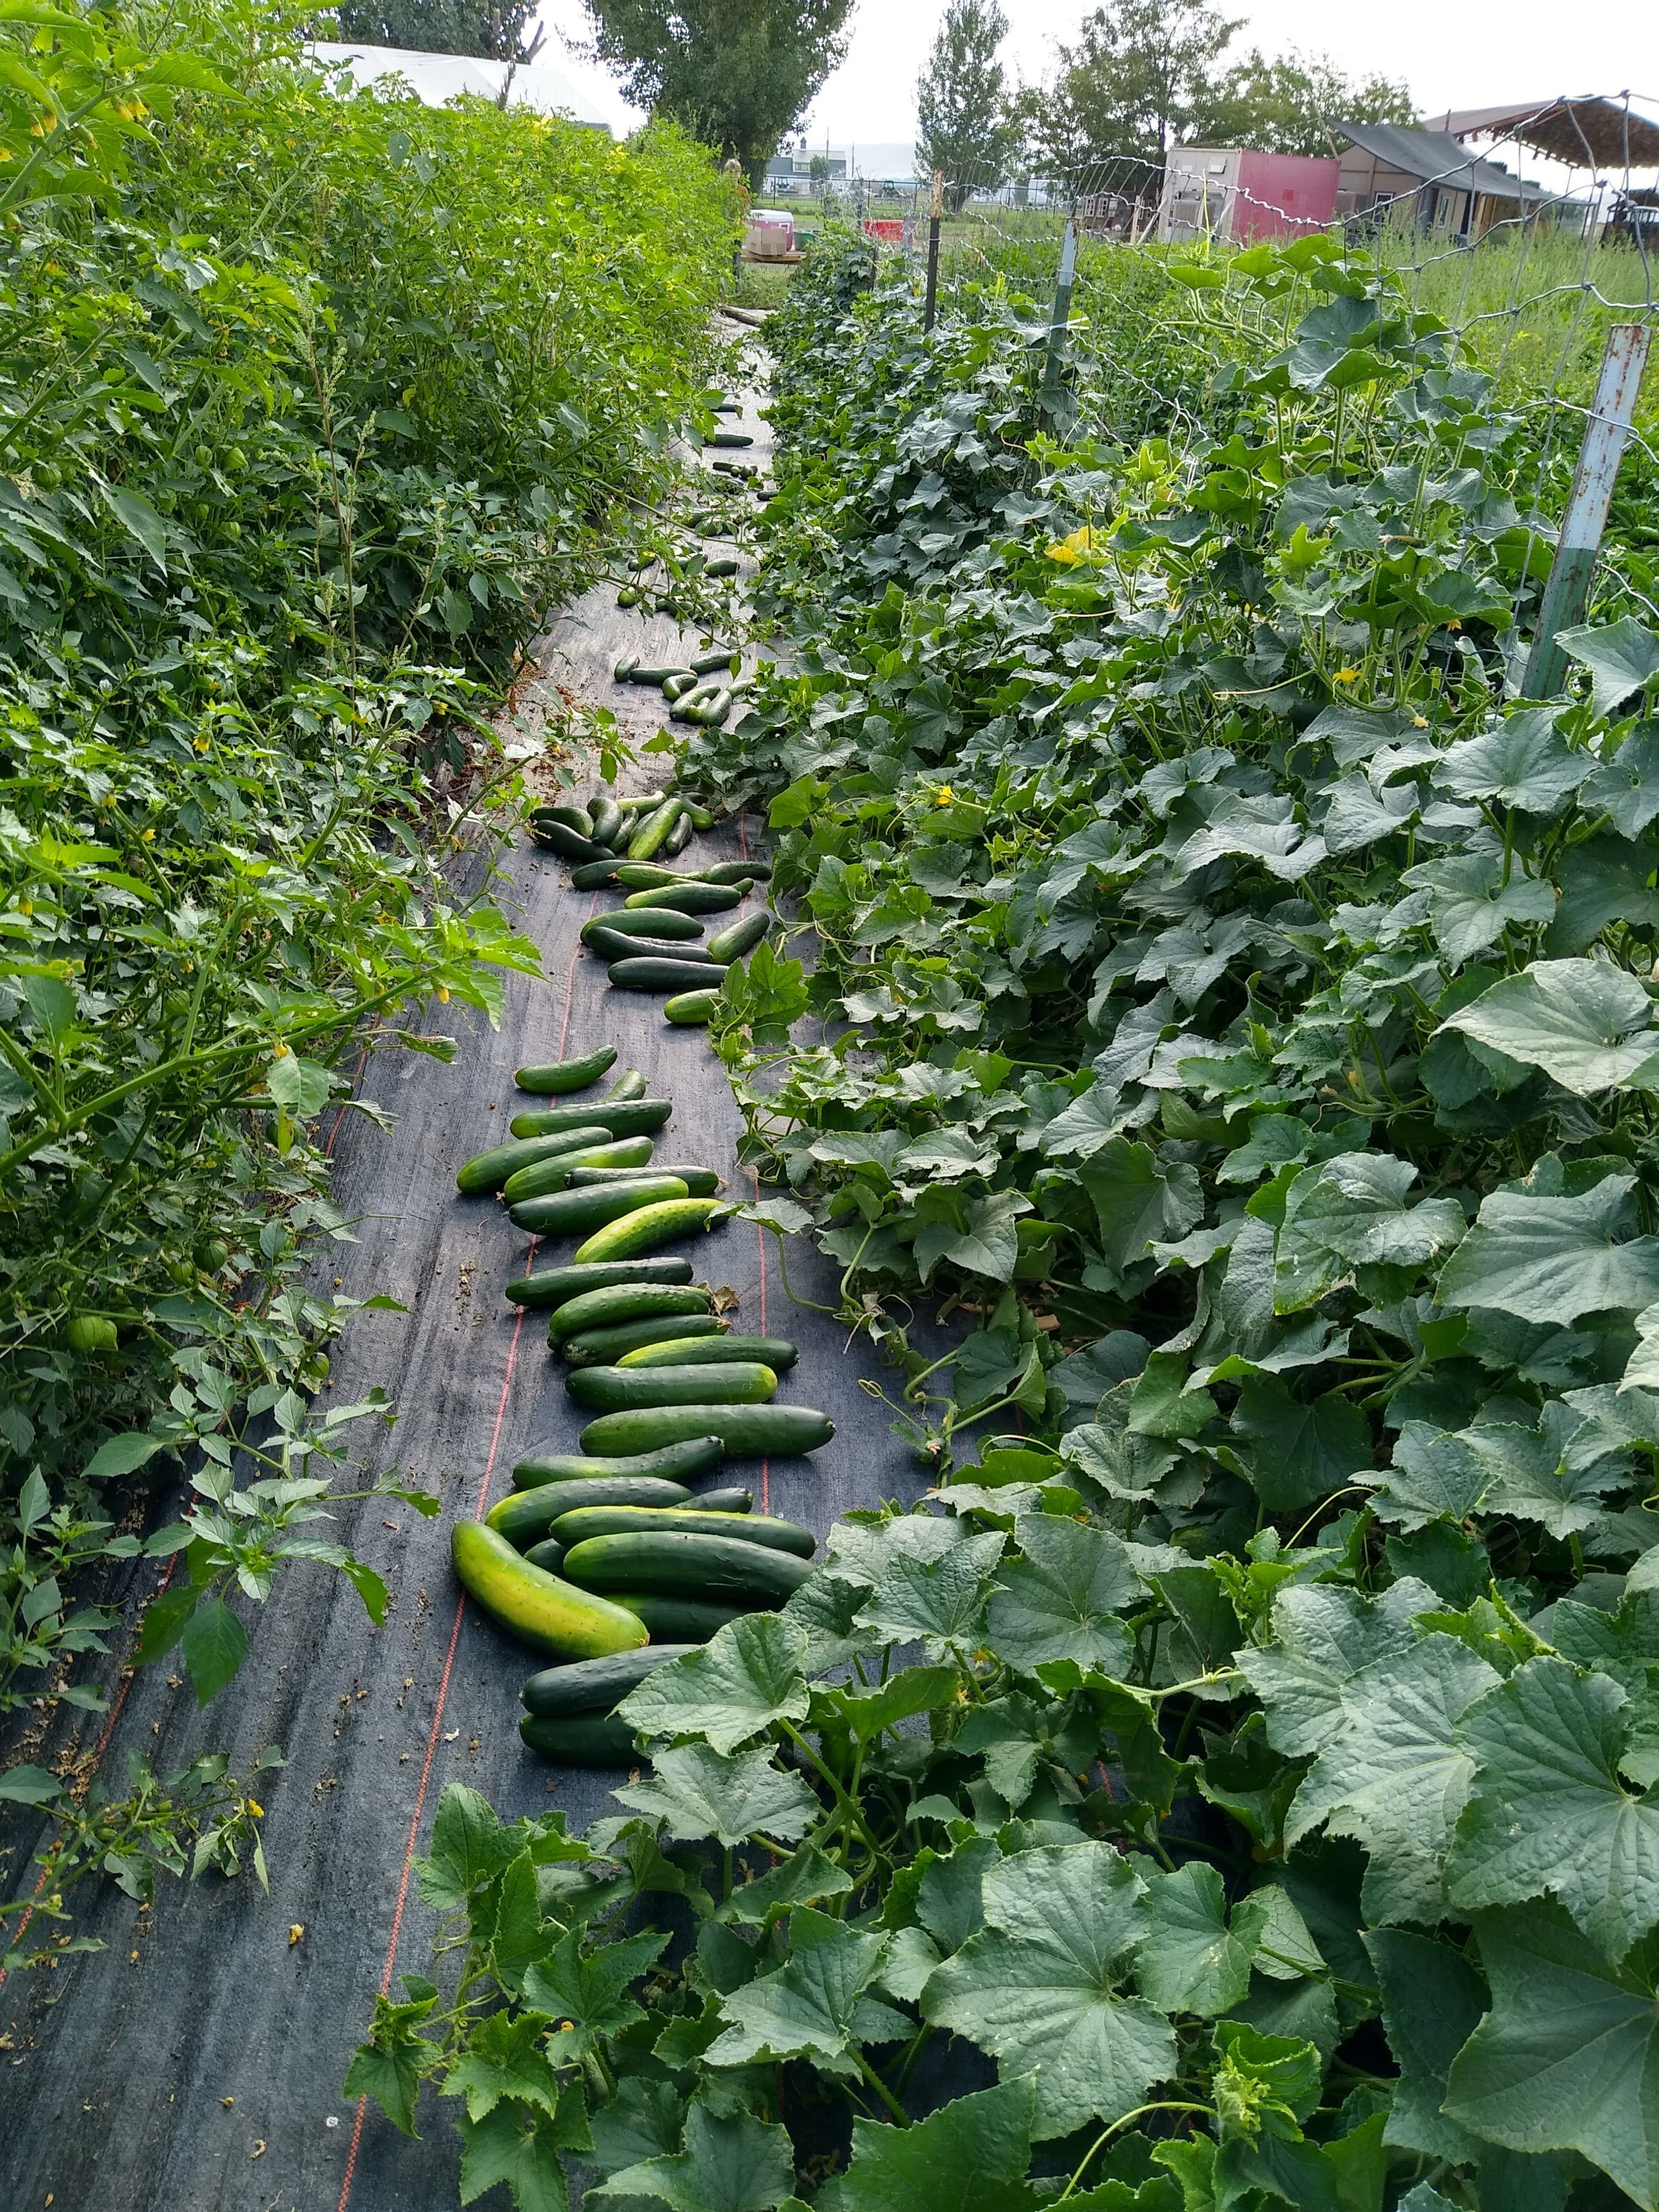 Previous Happening: Summer Week #12 - The year of the cucumber!